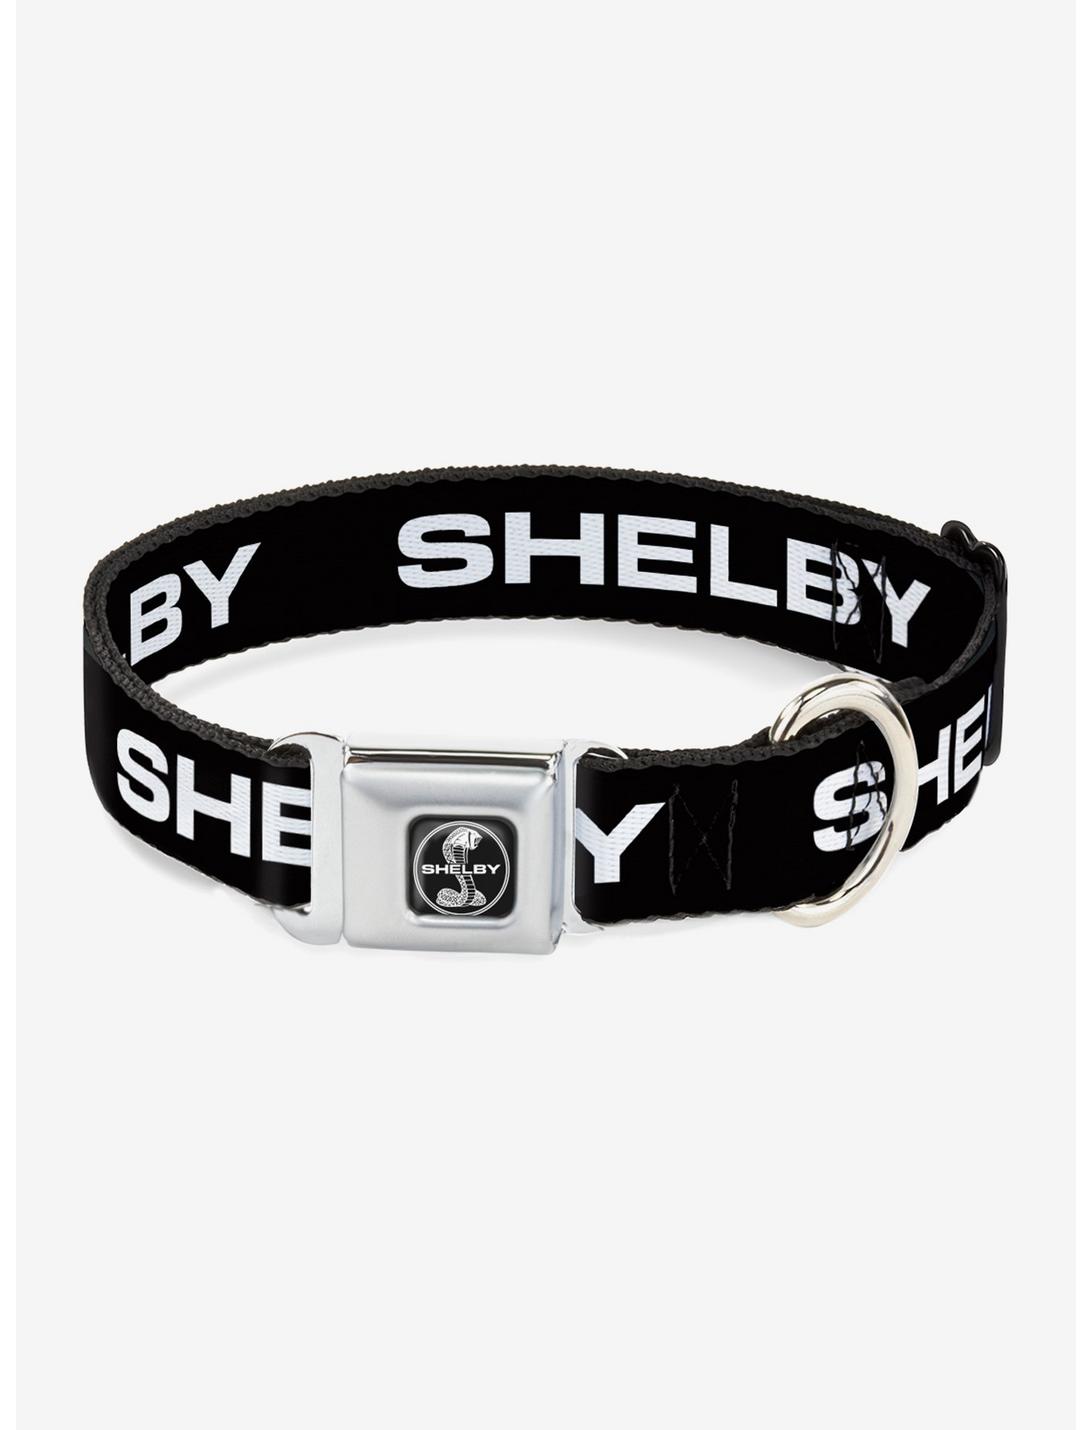 Shelby Text Only Seatbelt Buckle Dog Collar, BLACK, hi-res